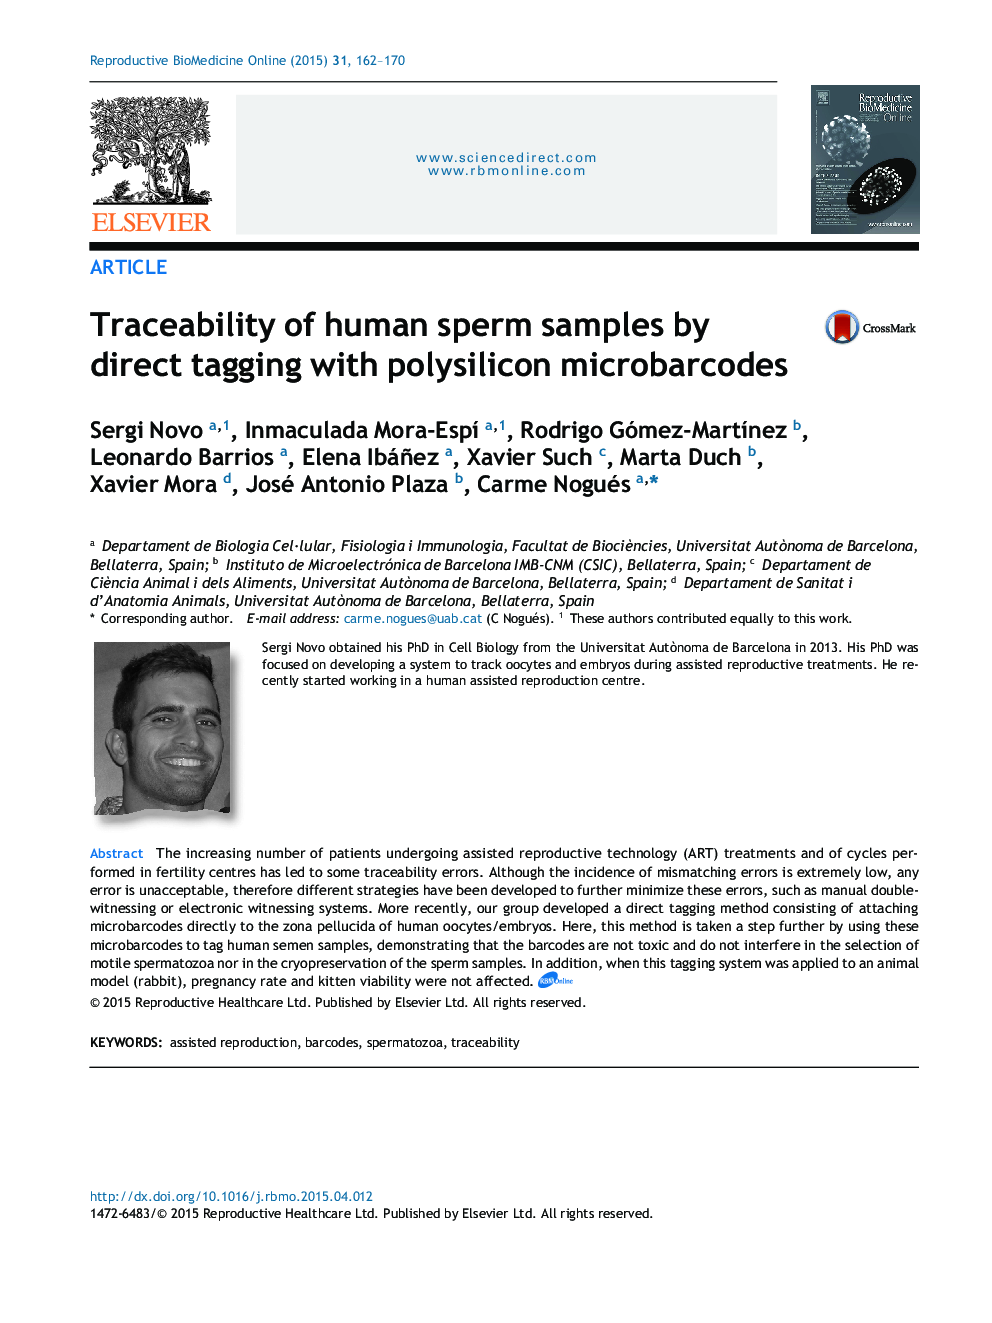 Traceability of human sperm samples by direct tagging with polysilicon microbarcodes